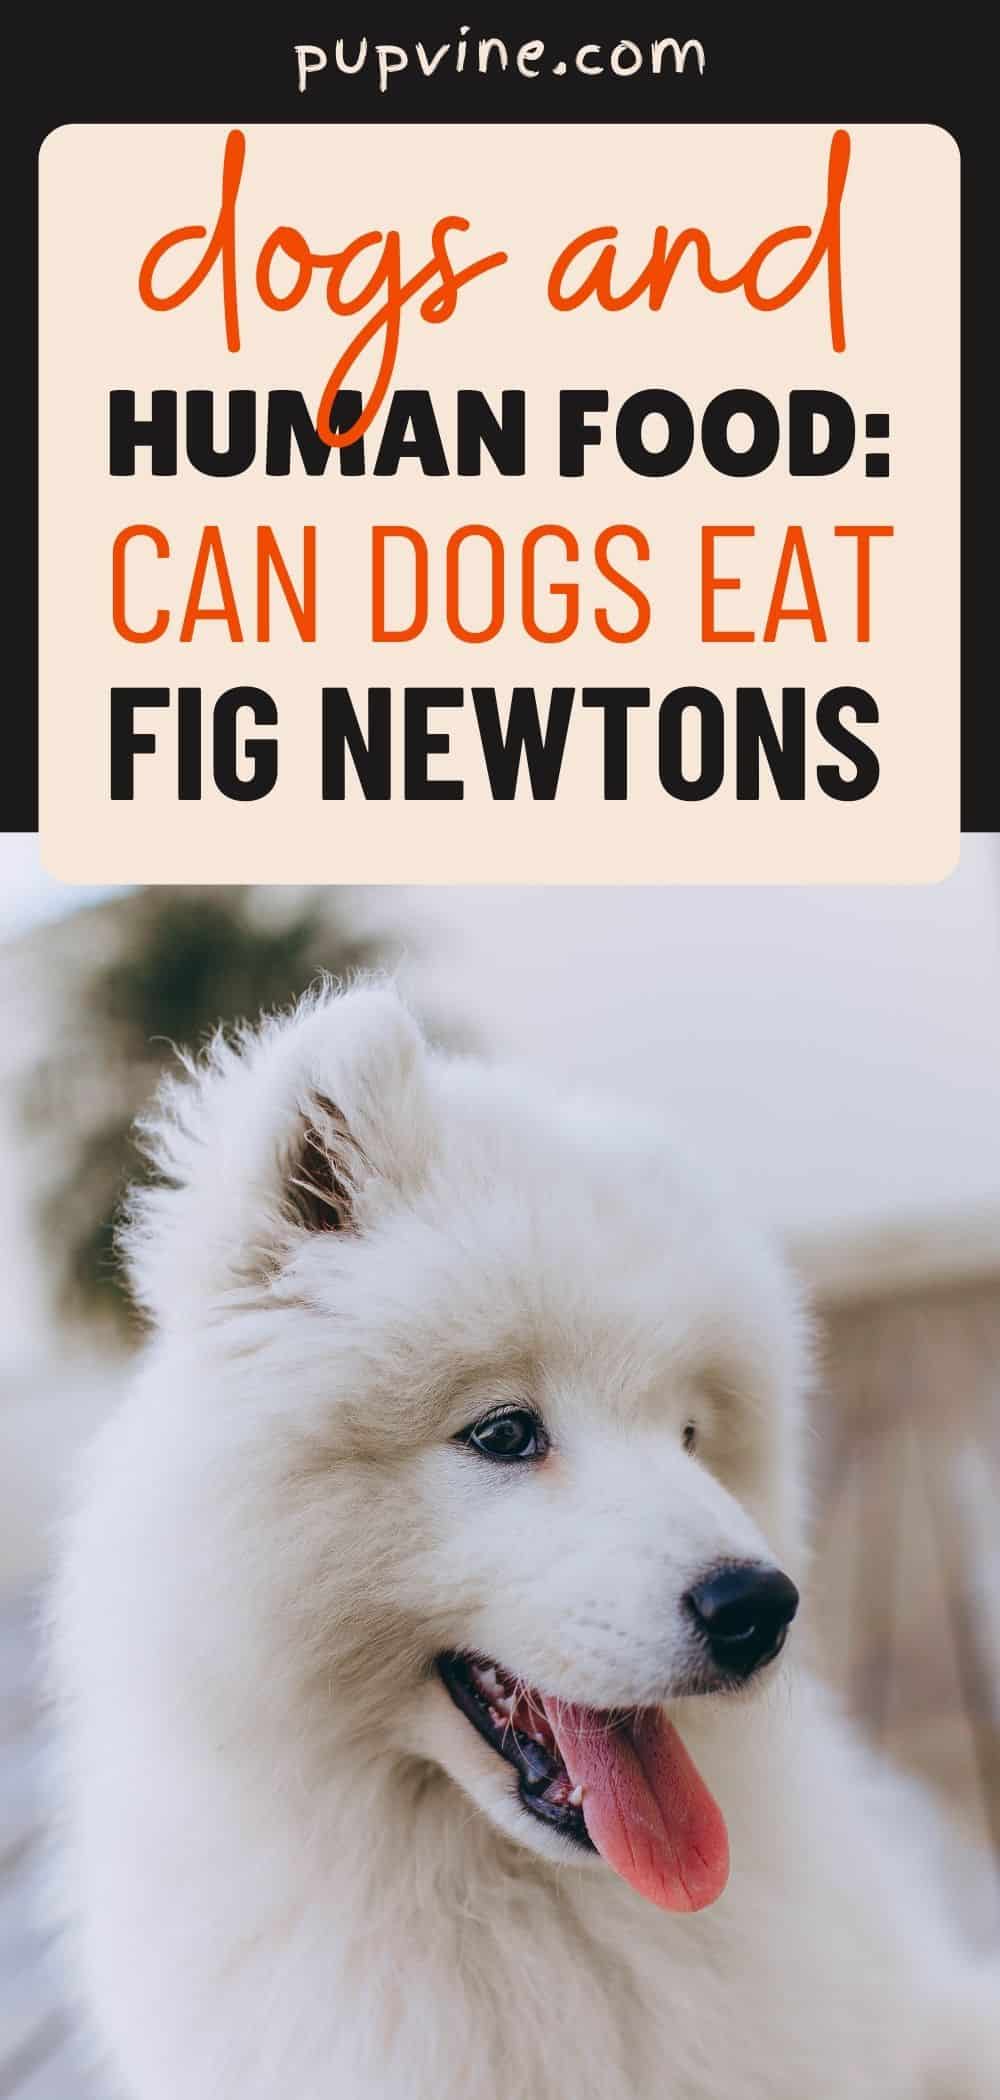 Dogs And Human Food: Can Dogs Eat Fig Newtons